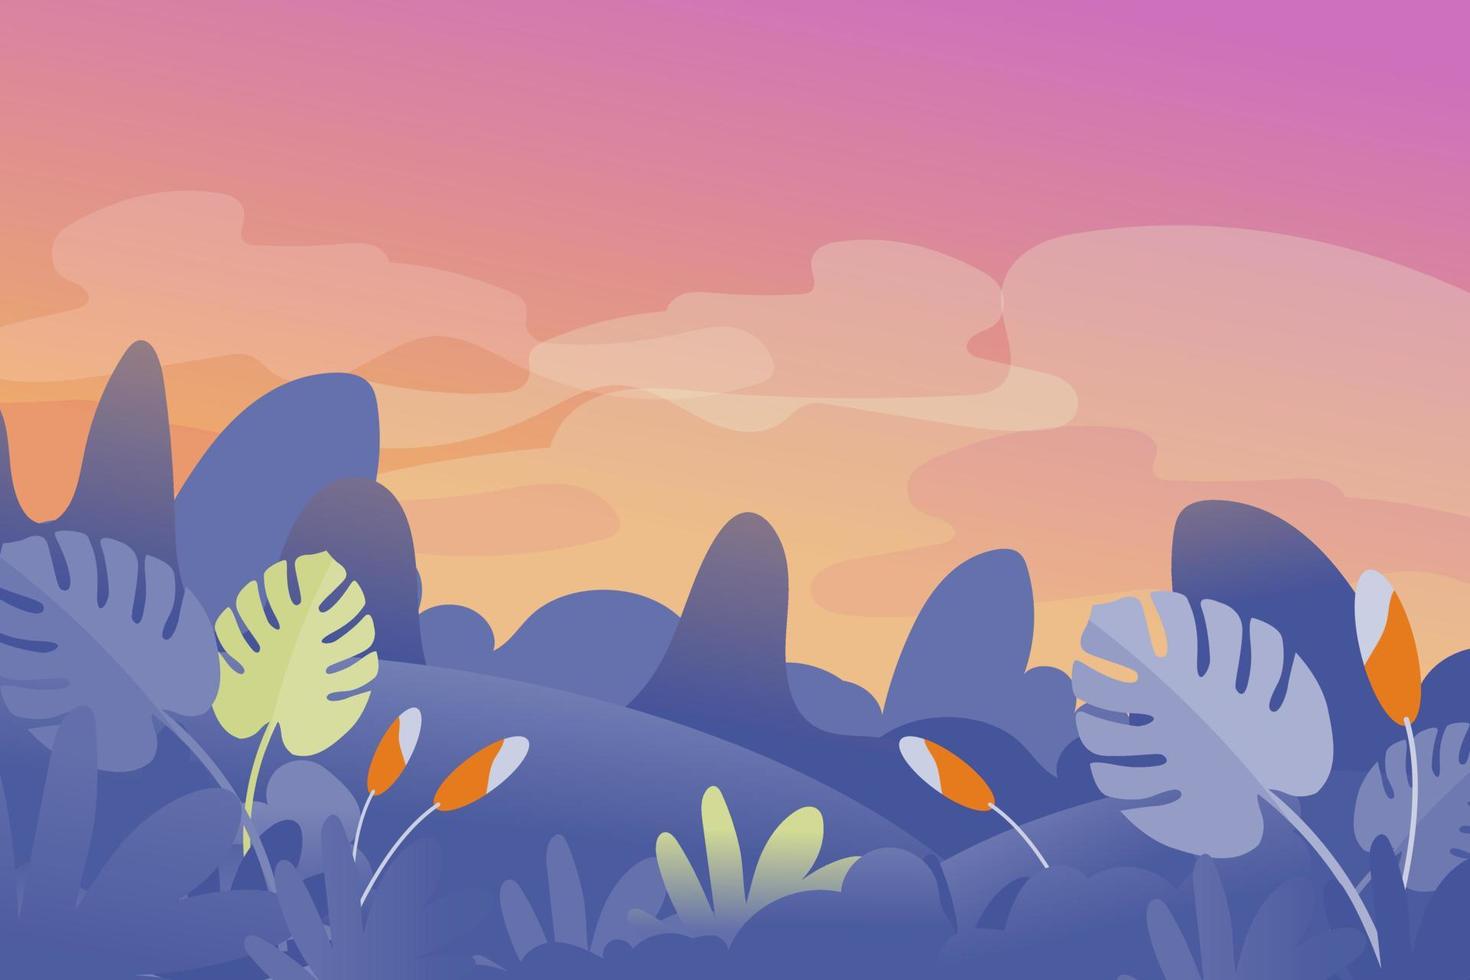 Spring and summer environment background or banner design with lovely flowers, leaves, mountain, landscape and sky element. EPS10 vector illustration